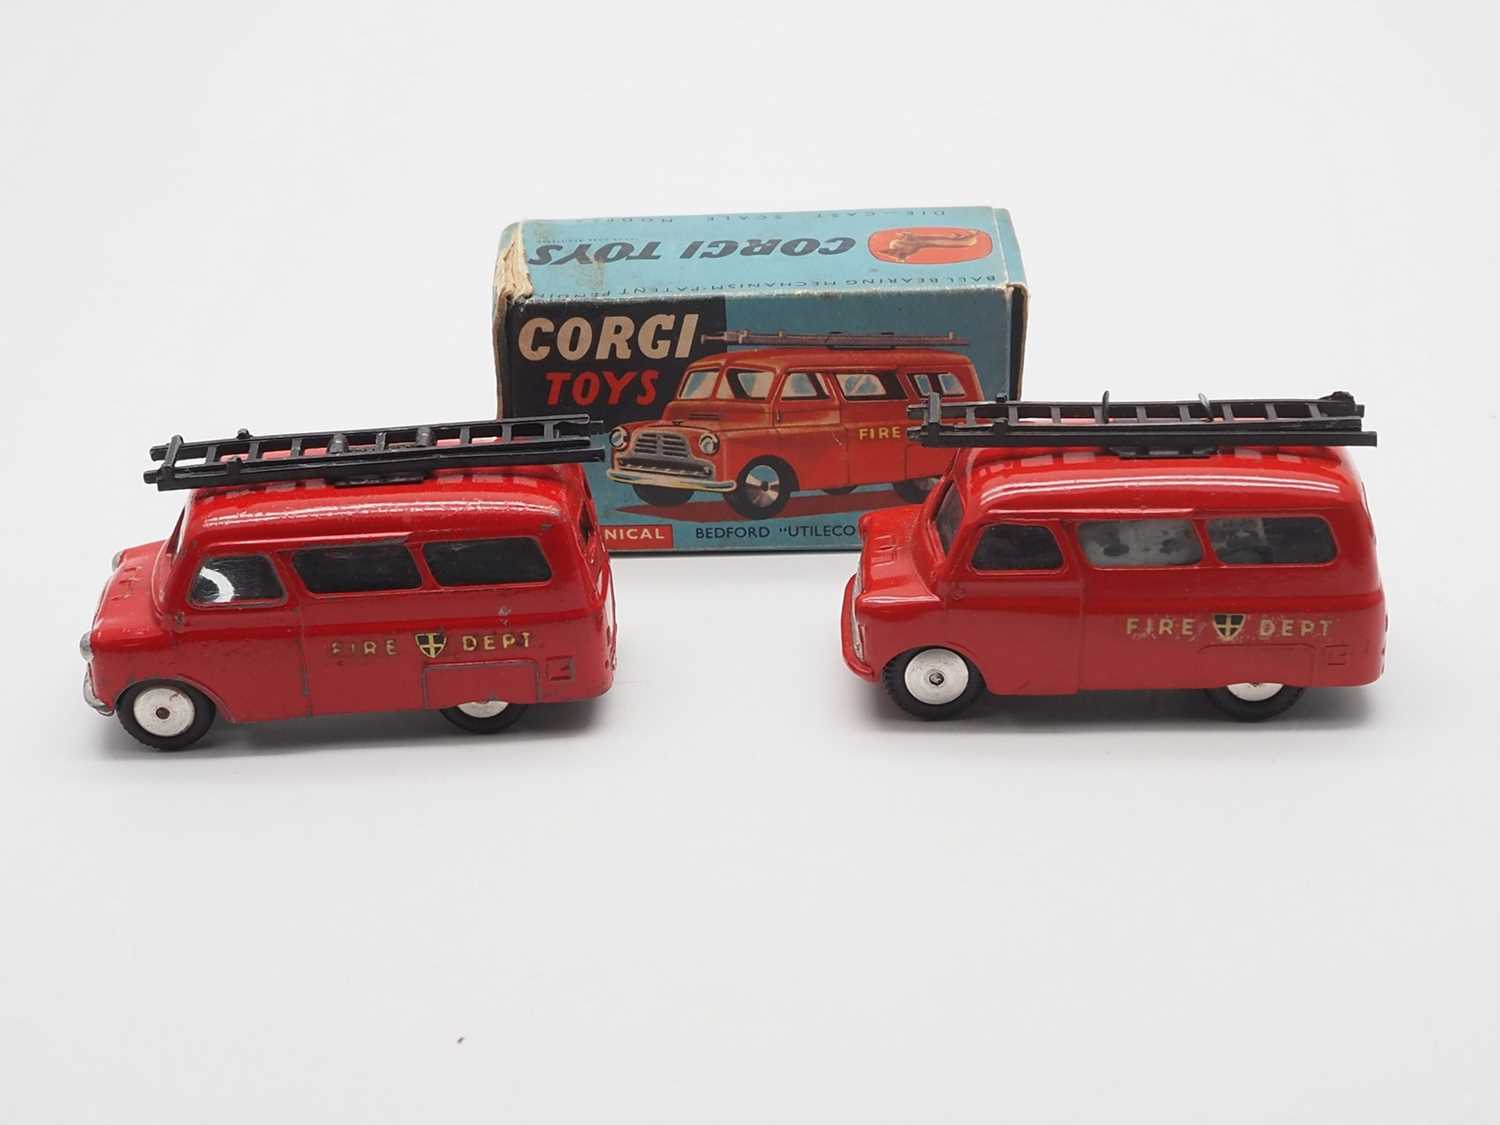 A CORGI 405M Bedford 'Utilecon' Fire Tender in red livery (friction motor non functional) together